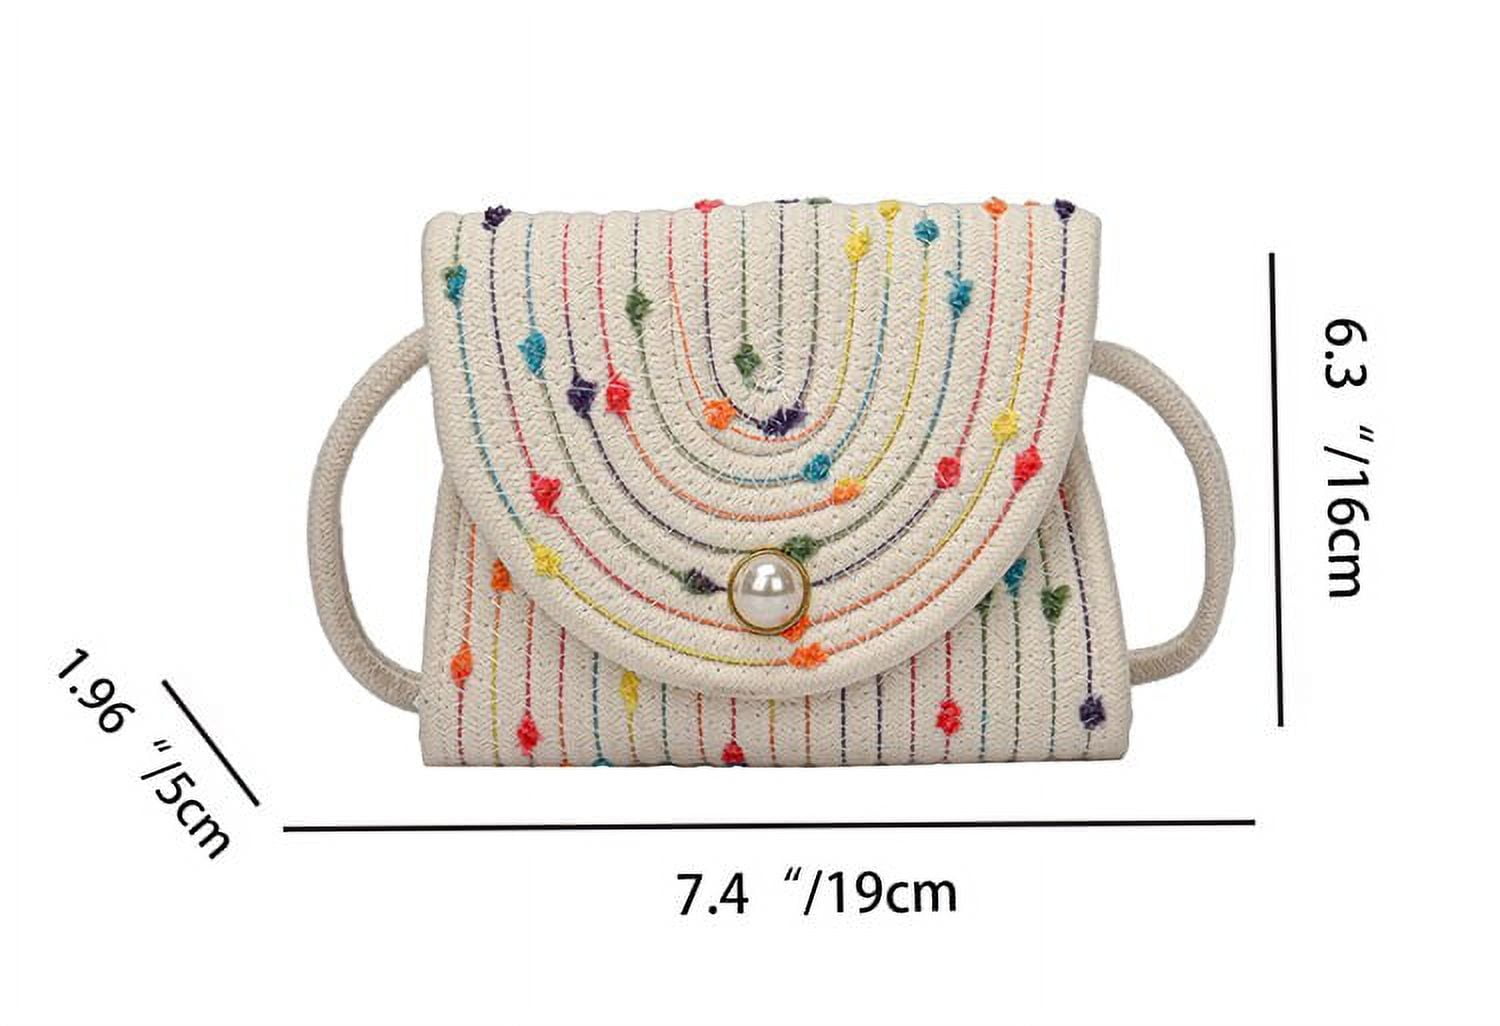 Buy FVVMEED 25 Inch Obag Rope Handle with Canvas Insert Handbag Strap Bag  Braided Band Repair Replacements for Obag Bag Female Handbag Shoulder Bag  Canvas Tote Purse Practical Accessories (Beige) Online at